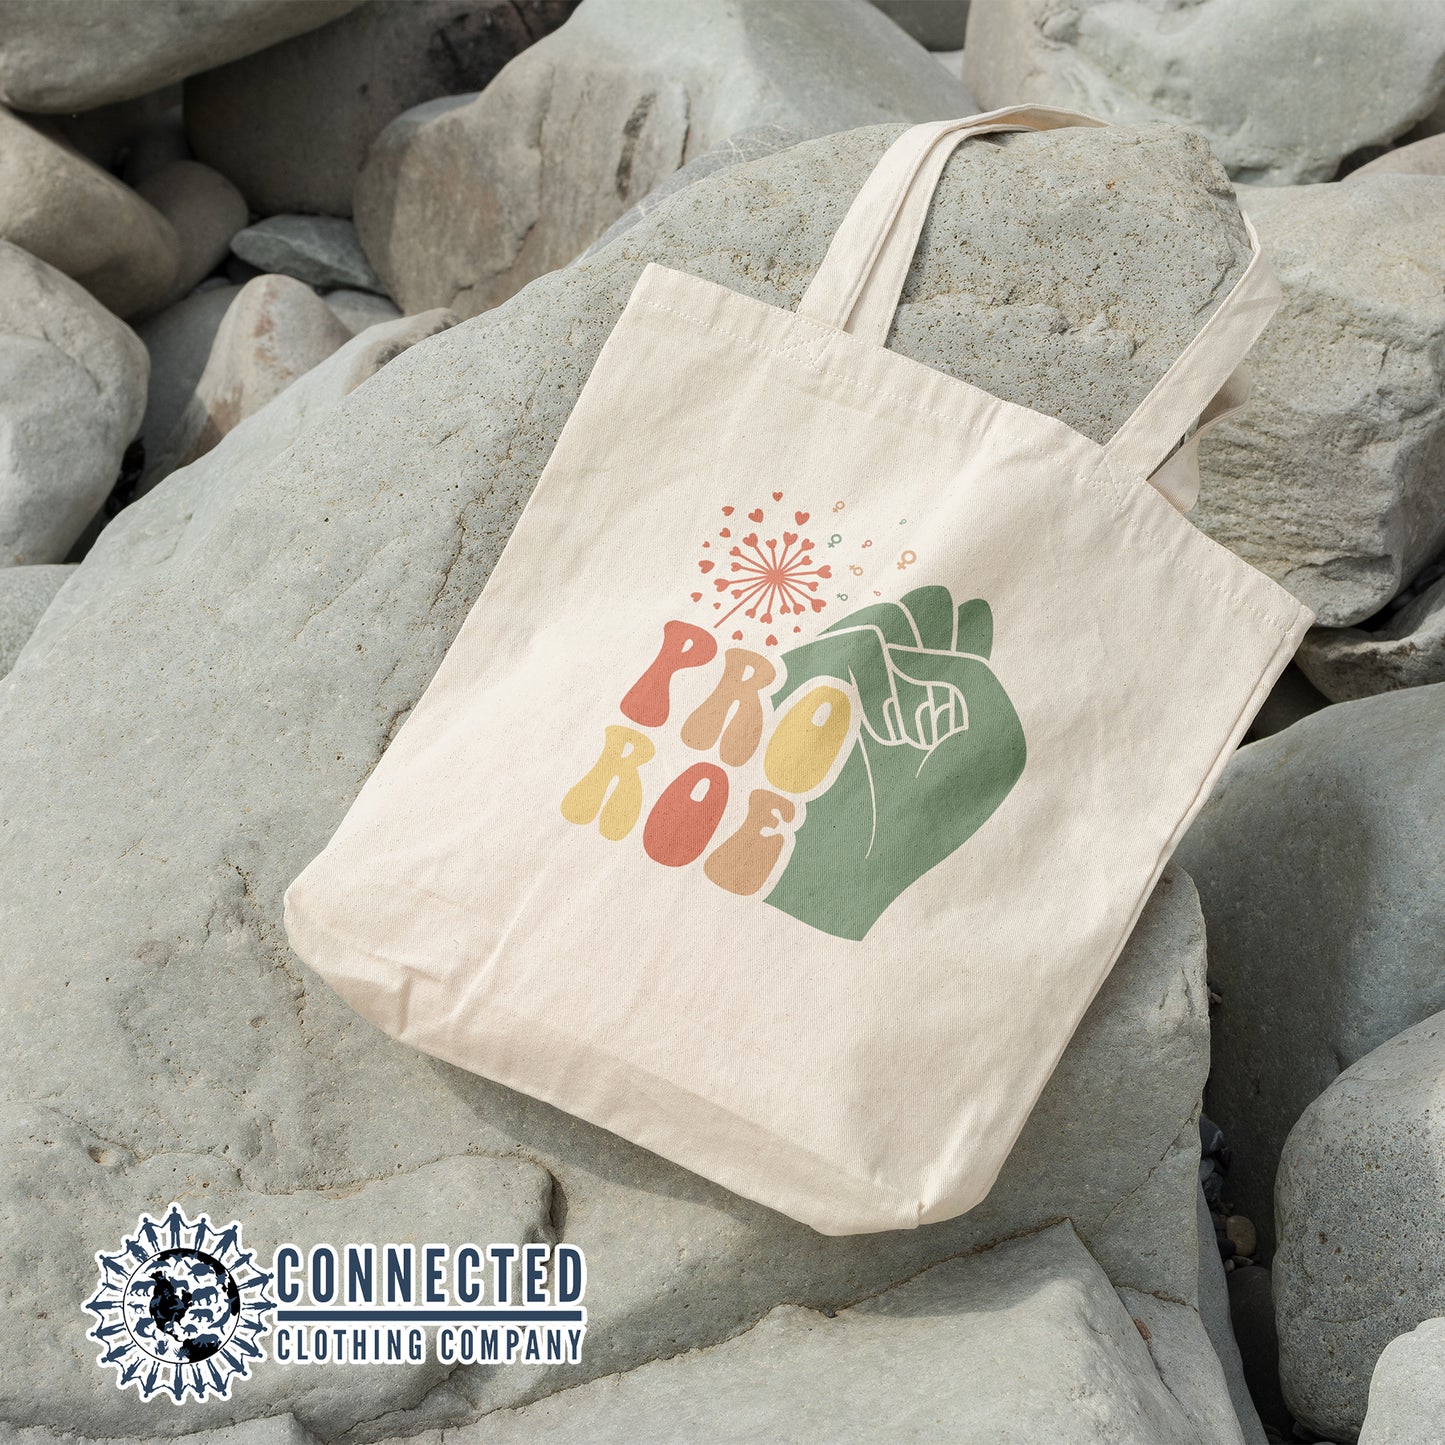 Pro Roe Tote Bag - Connected Clothing Company